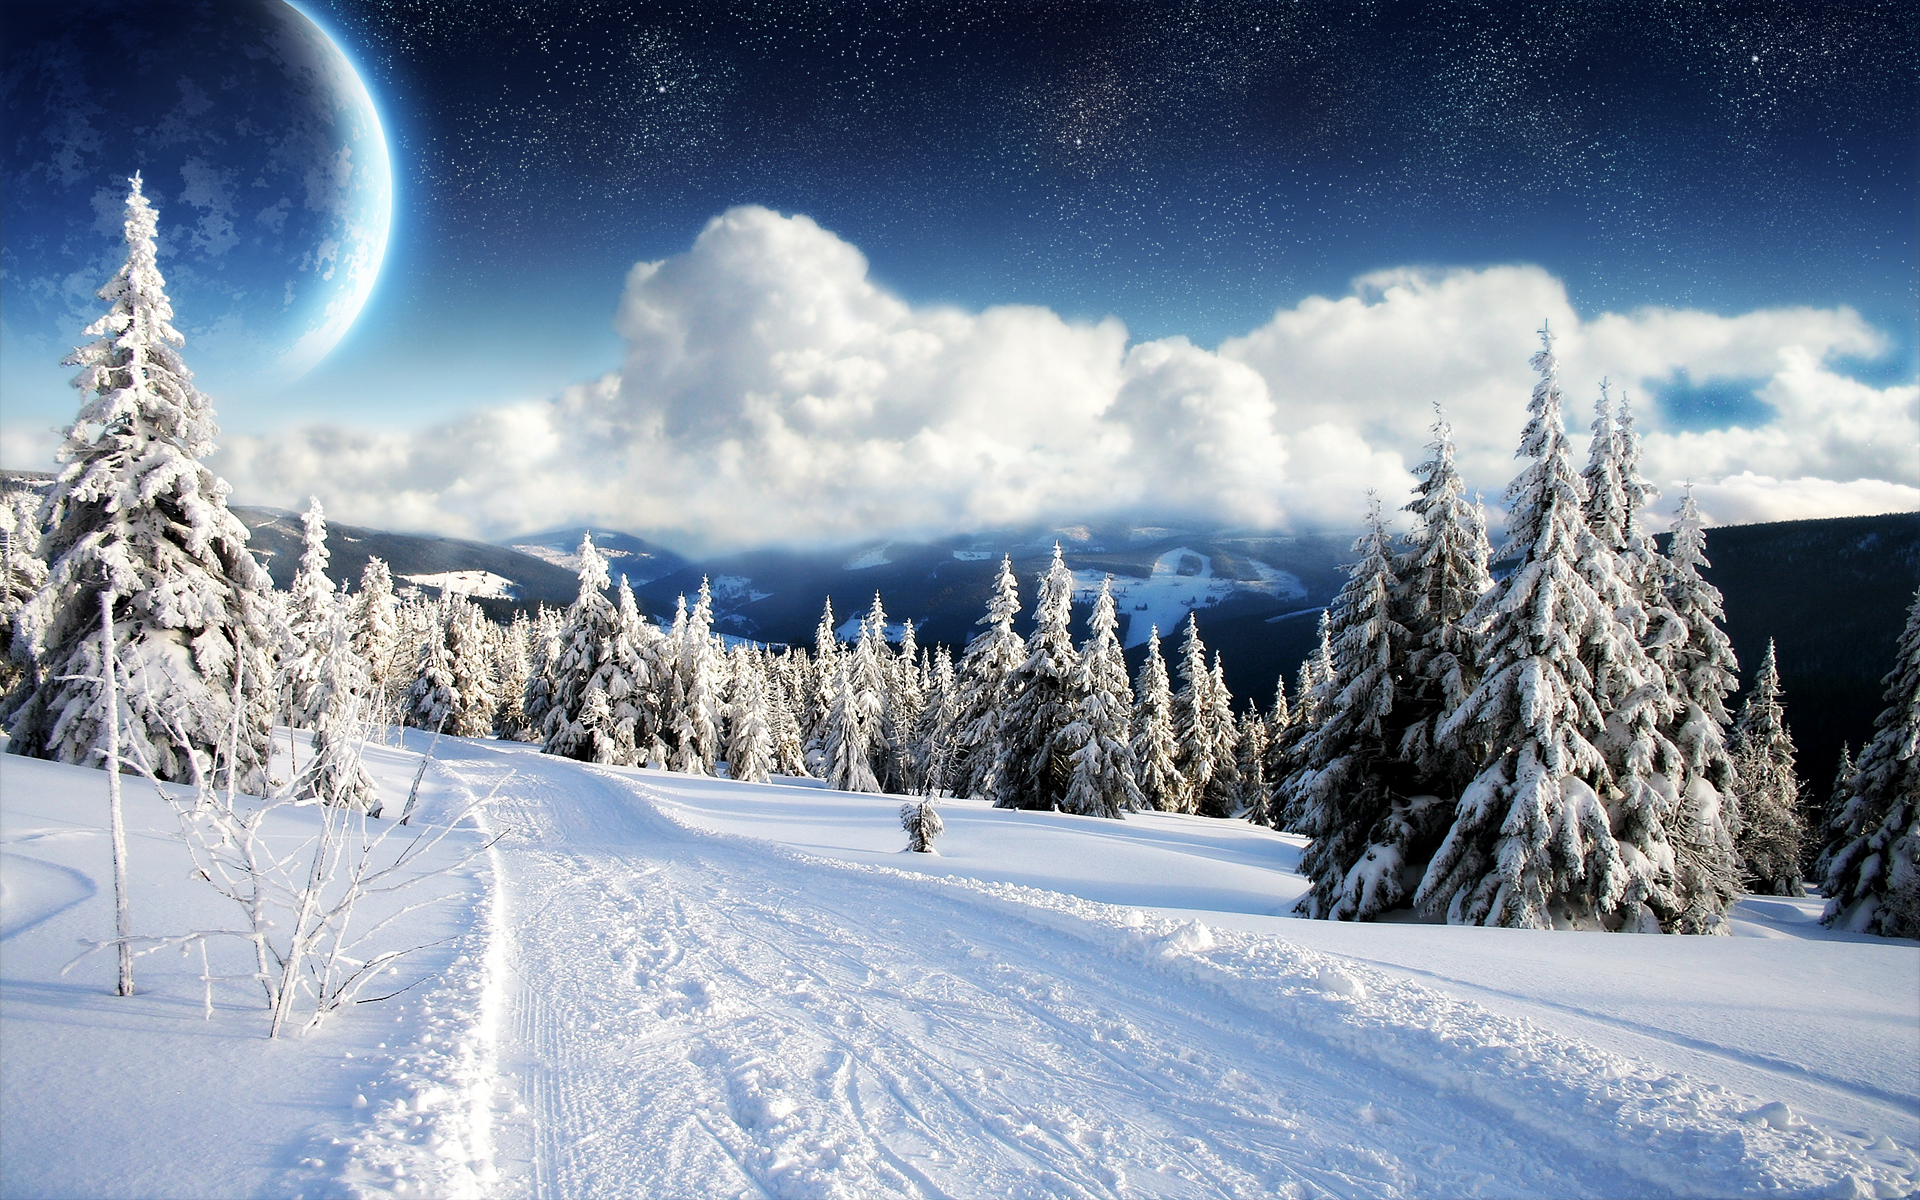 General 1920x1200 snow winter sky mountains nature cold ice trees road photo manipulation digital art